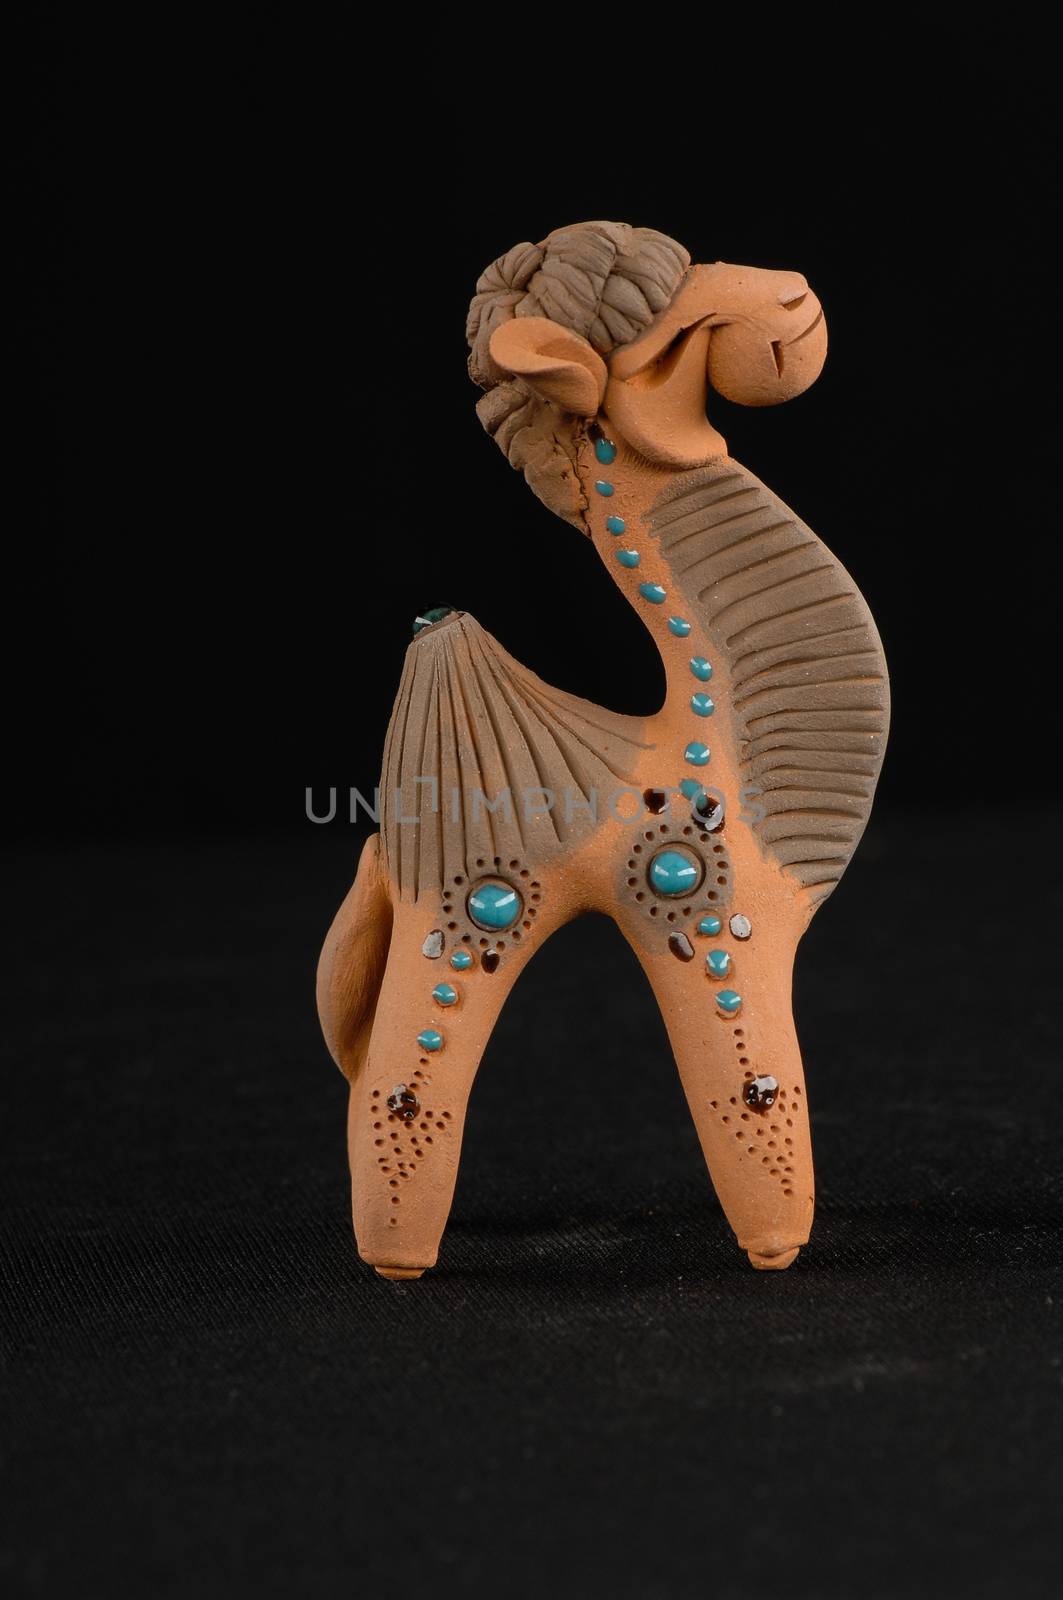 Asian and Oriental painted toy from burnt clay in the form of a camel on a black background